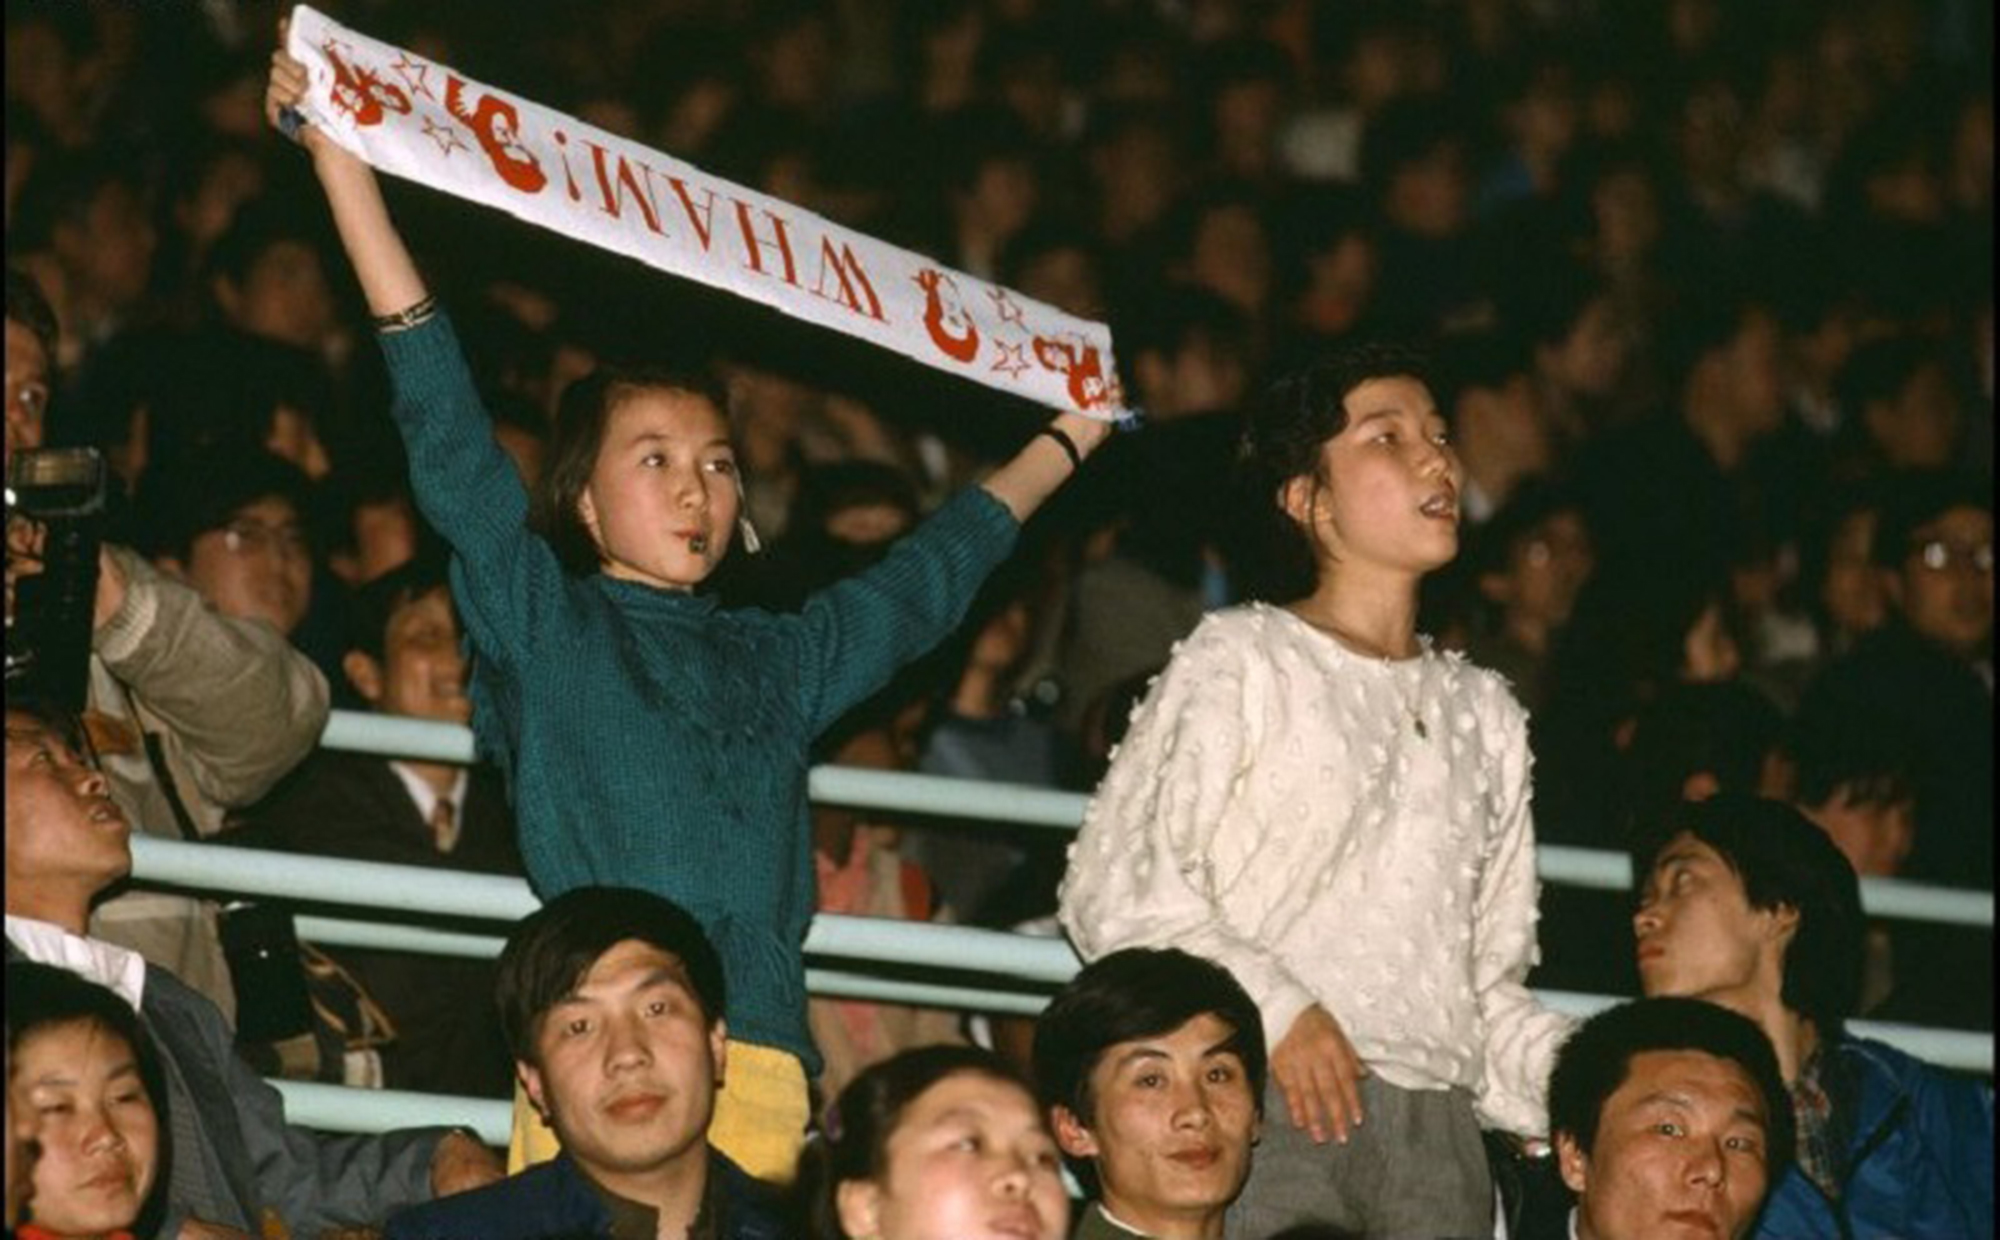 Wham fans at a concert in China, 1985